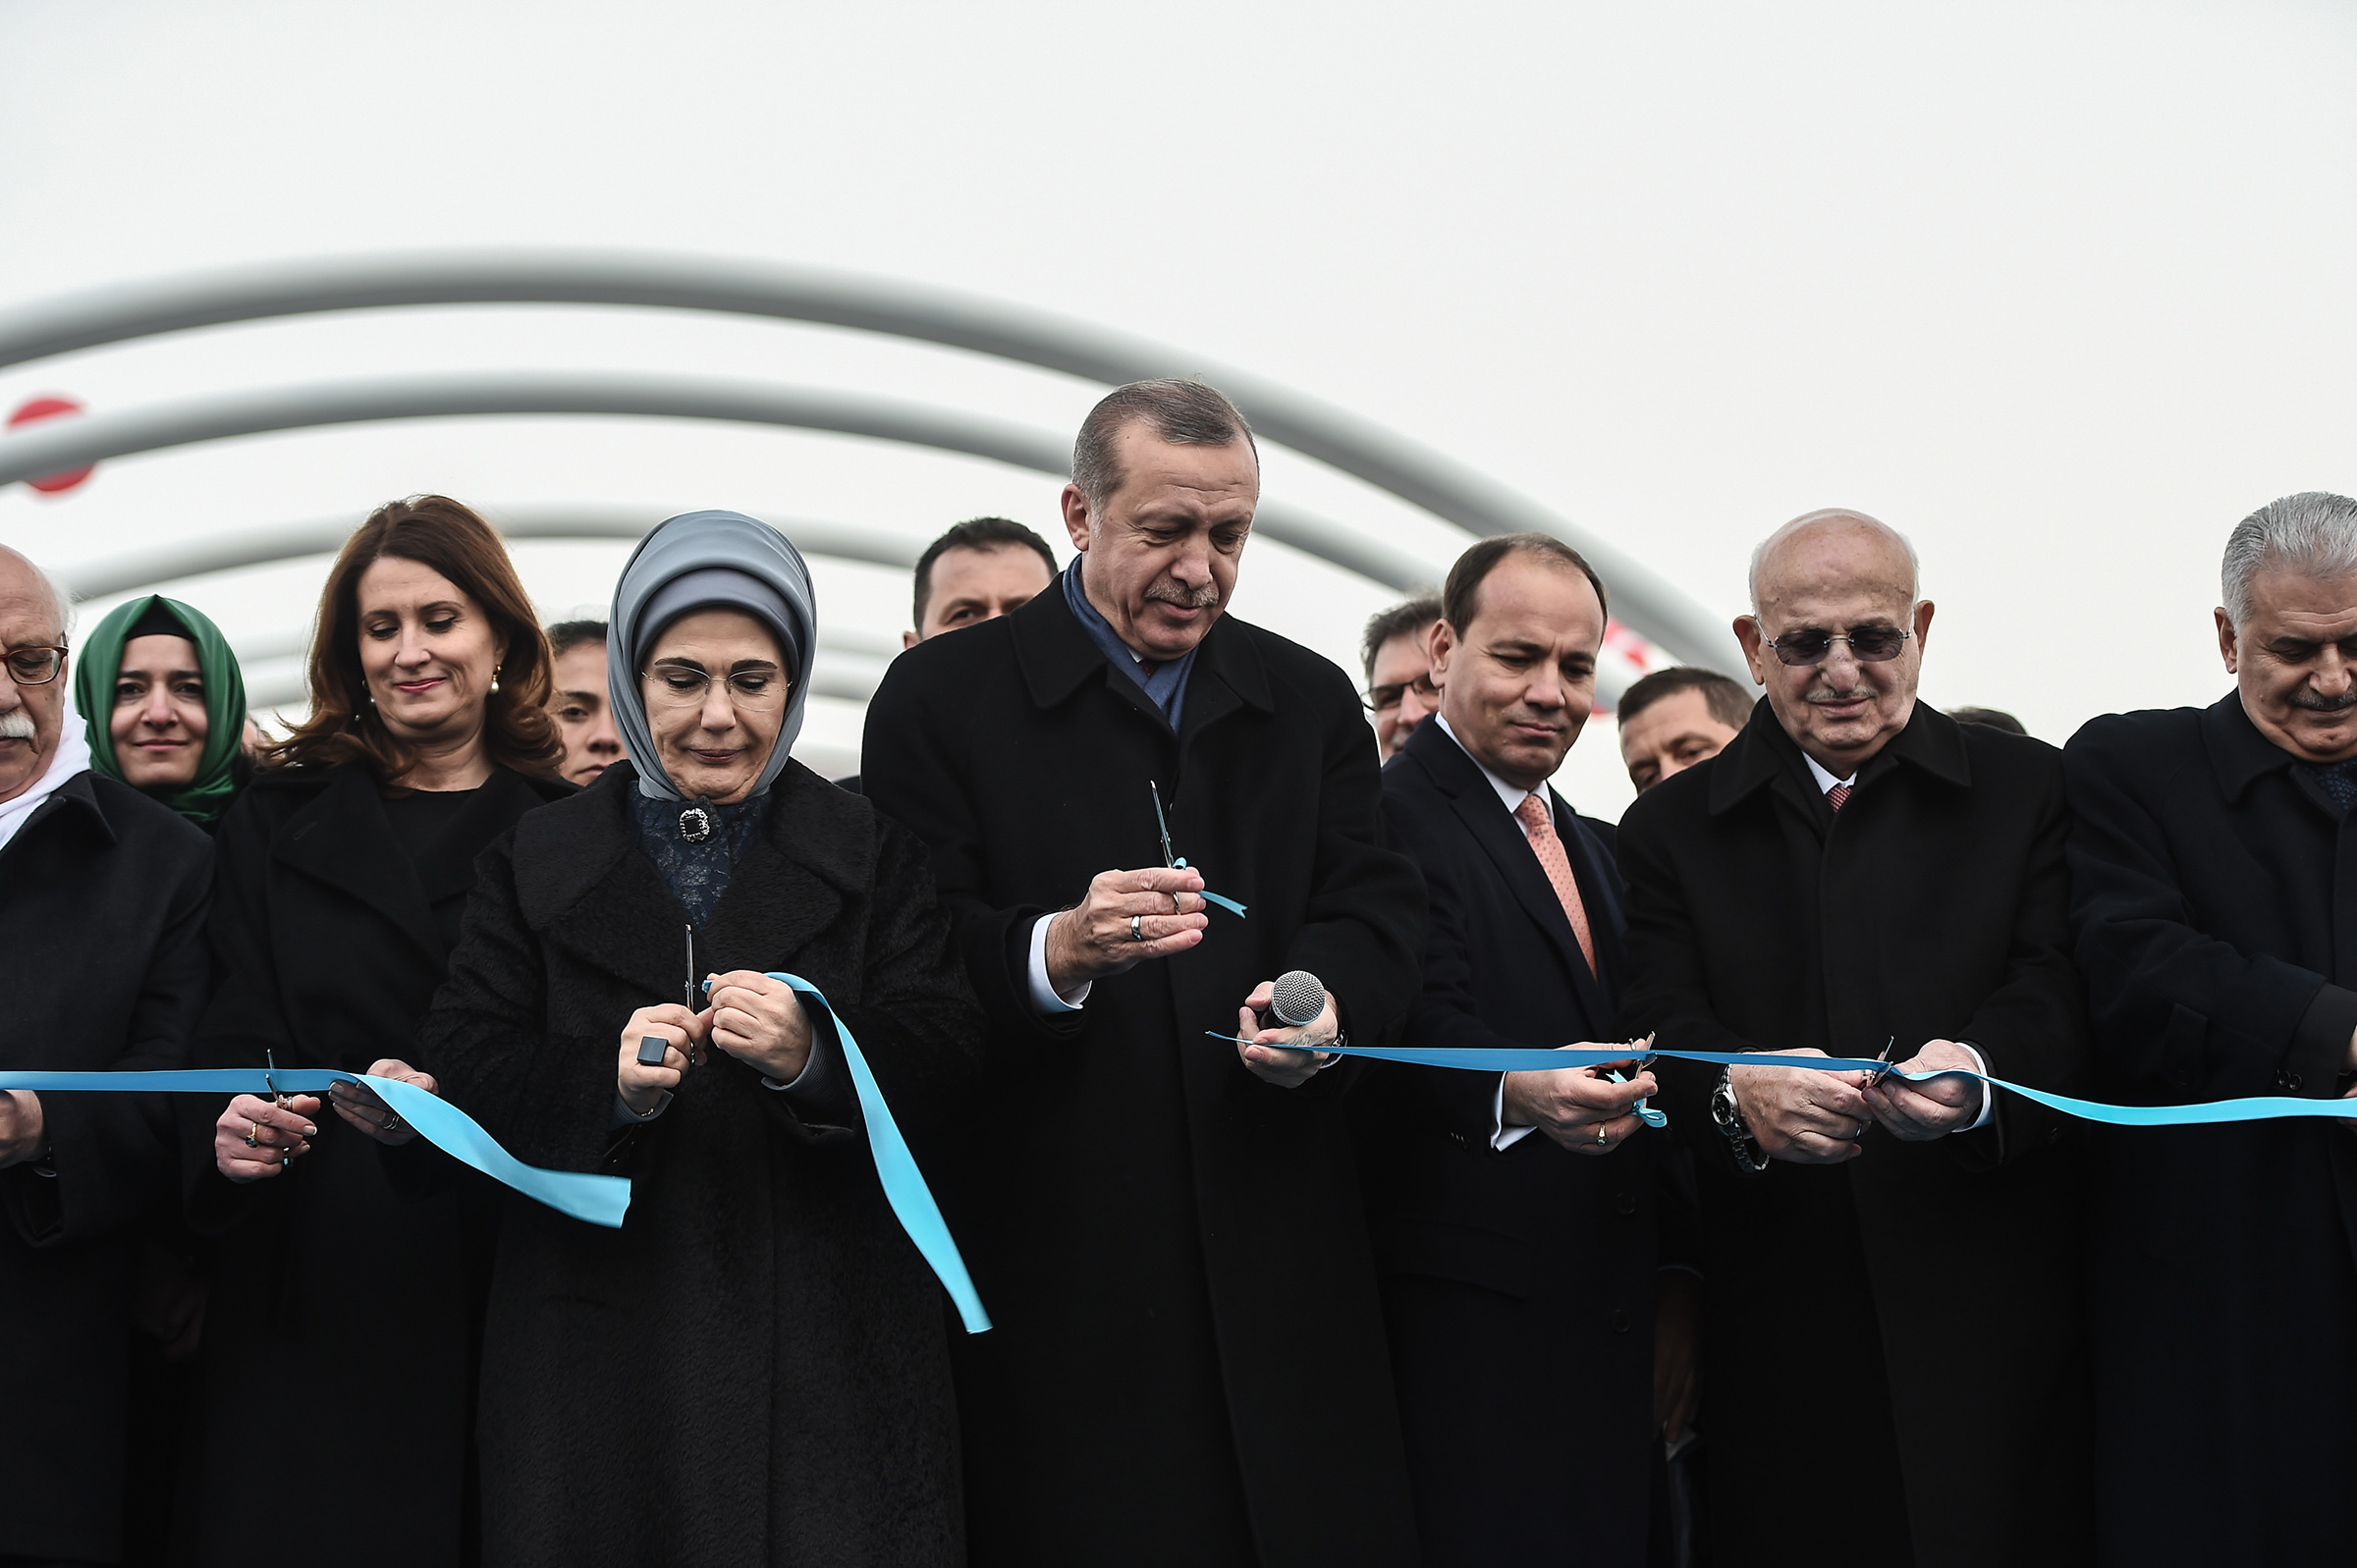 Turkish President Recep Tayyip Erdogan, center, with his wife Emine Erdogan by his side and Prime Minister Binali Yildirim, right, during the opening ceremony of a road tunnel underneath the Bosporus Strait in Istanbul in December 2016.